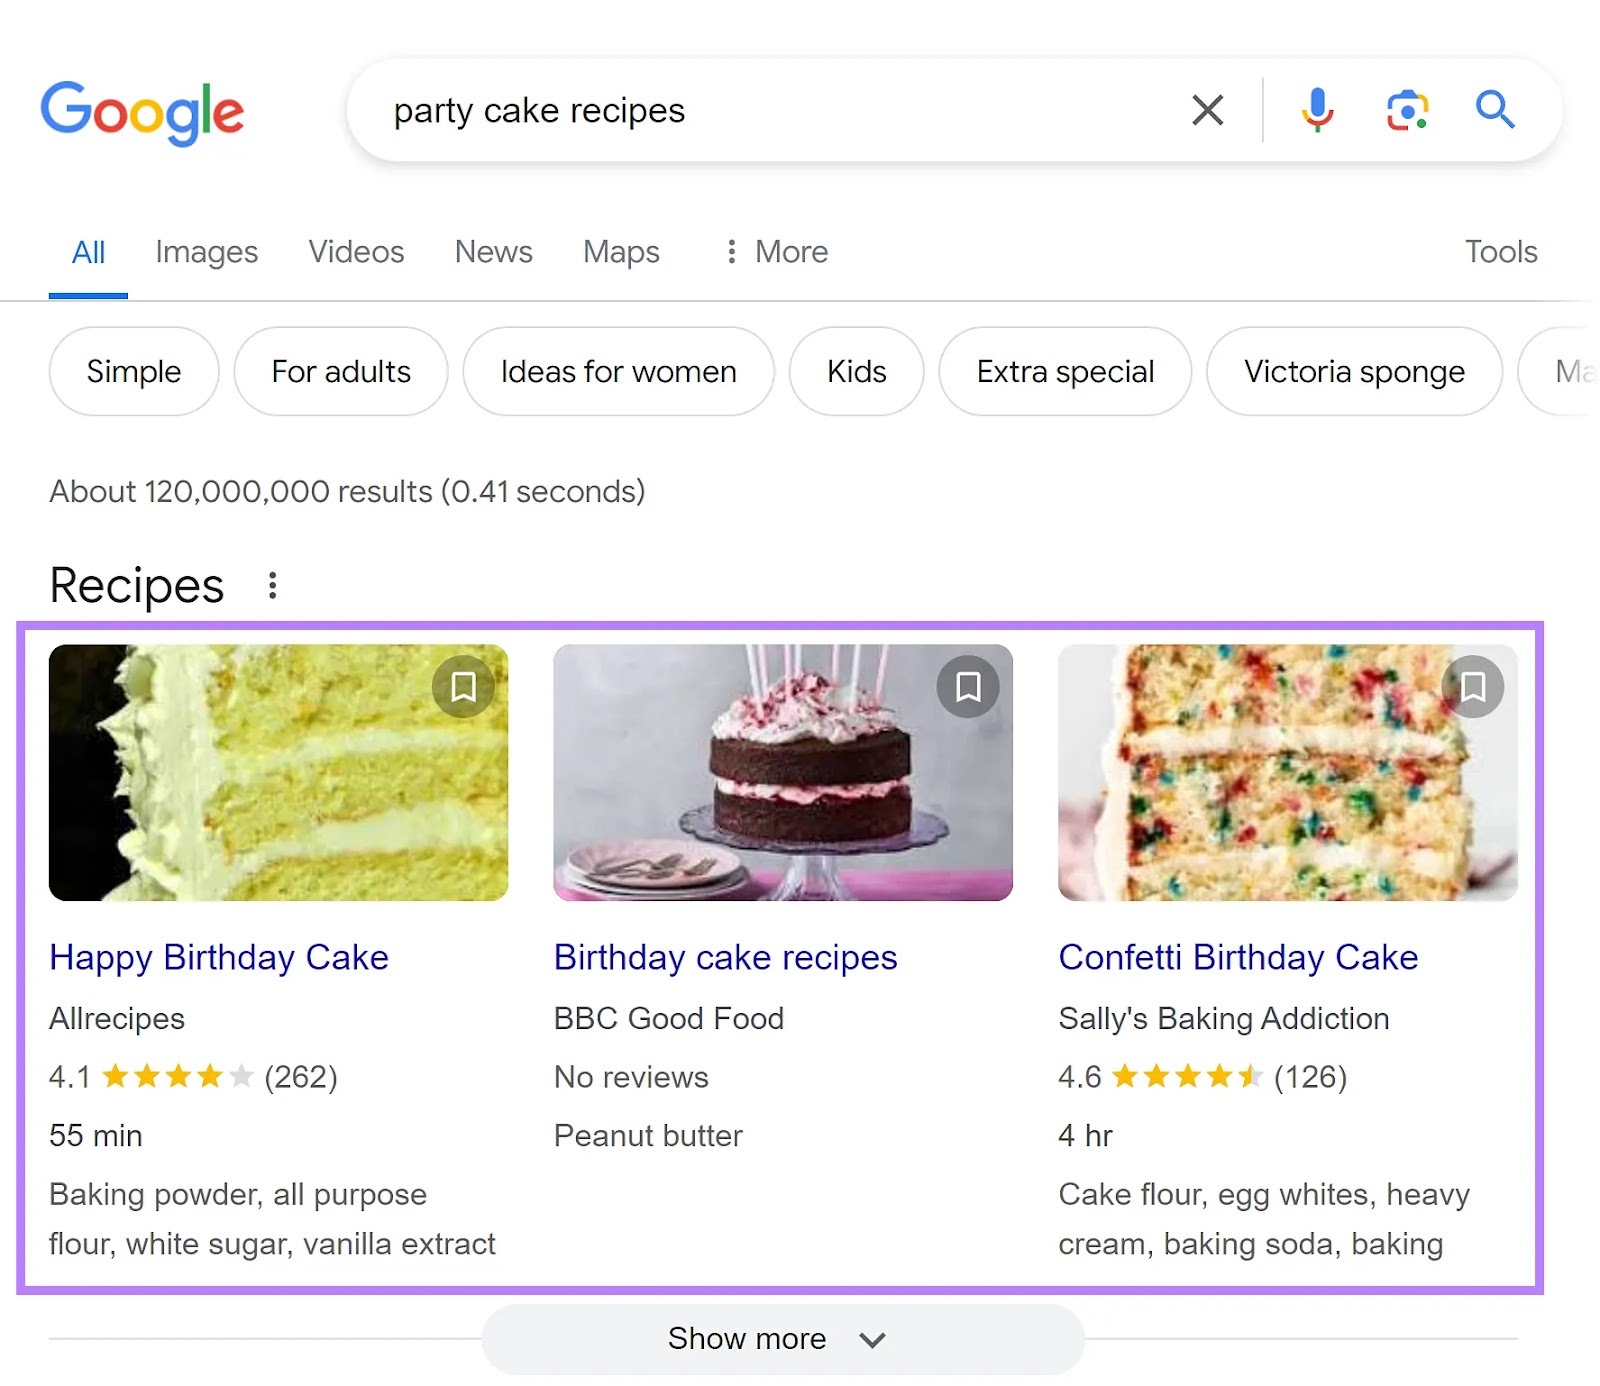 Rich snippets of birthday cake recipes as shown in the Google Search Engine Results Page.